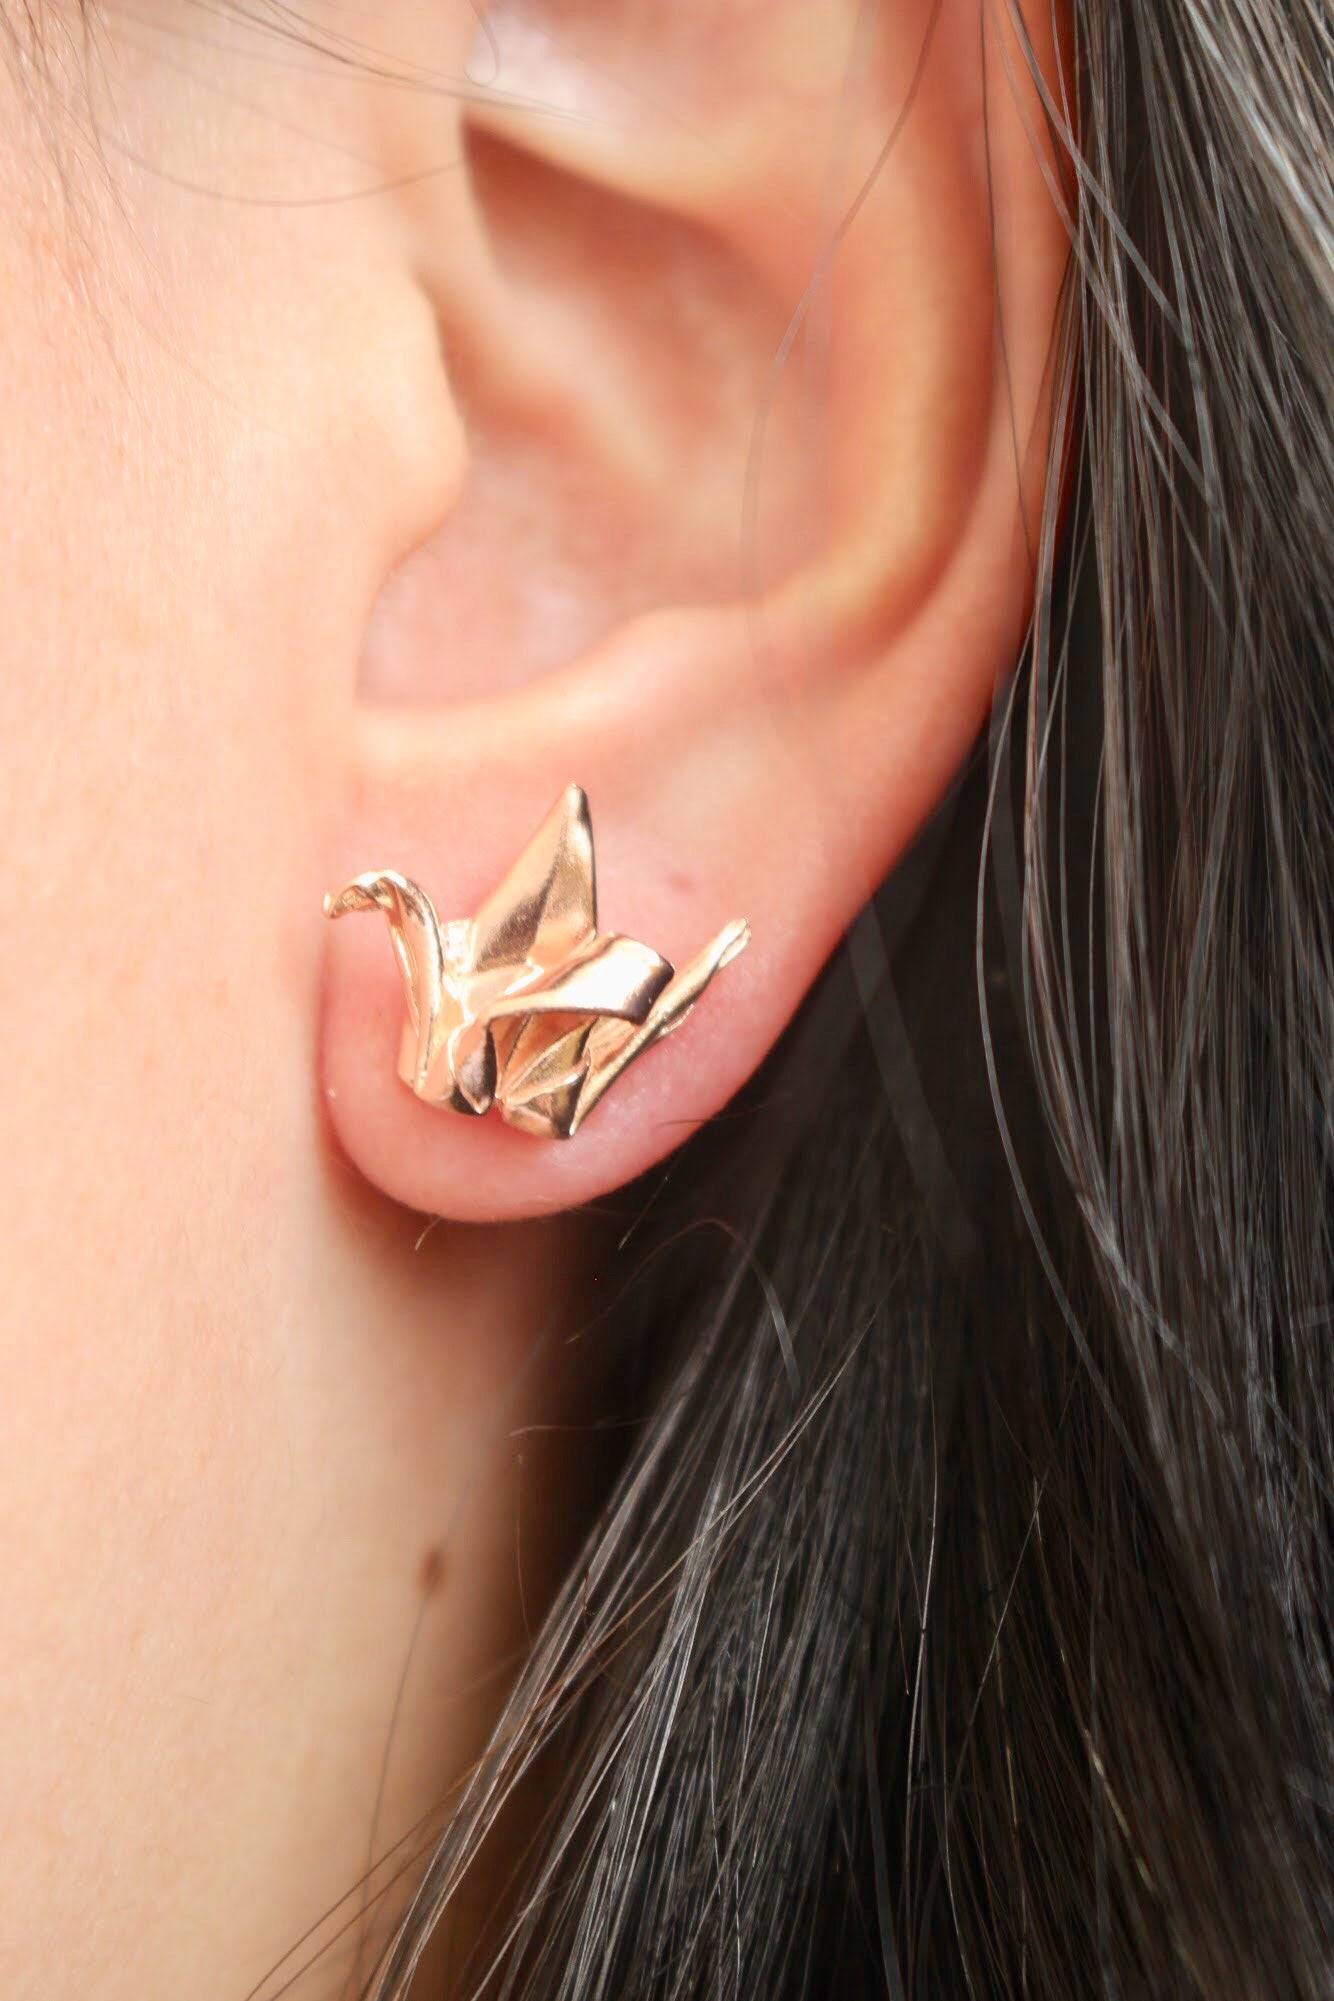 Rose Gold Plated Silver Origami Crane Earrings